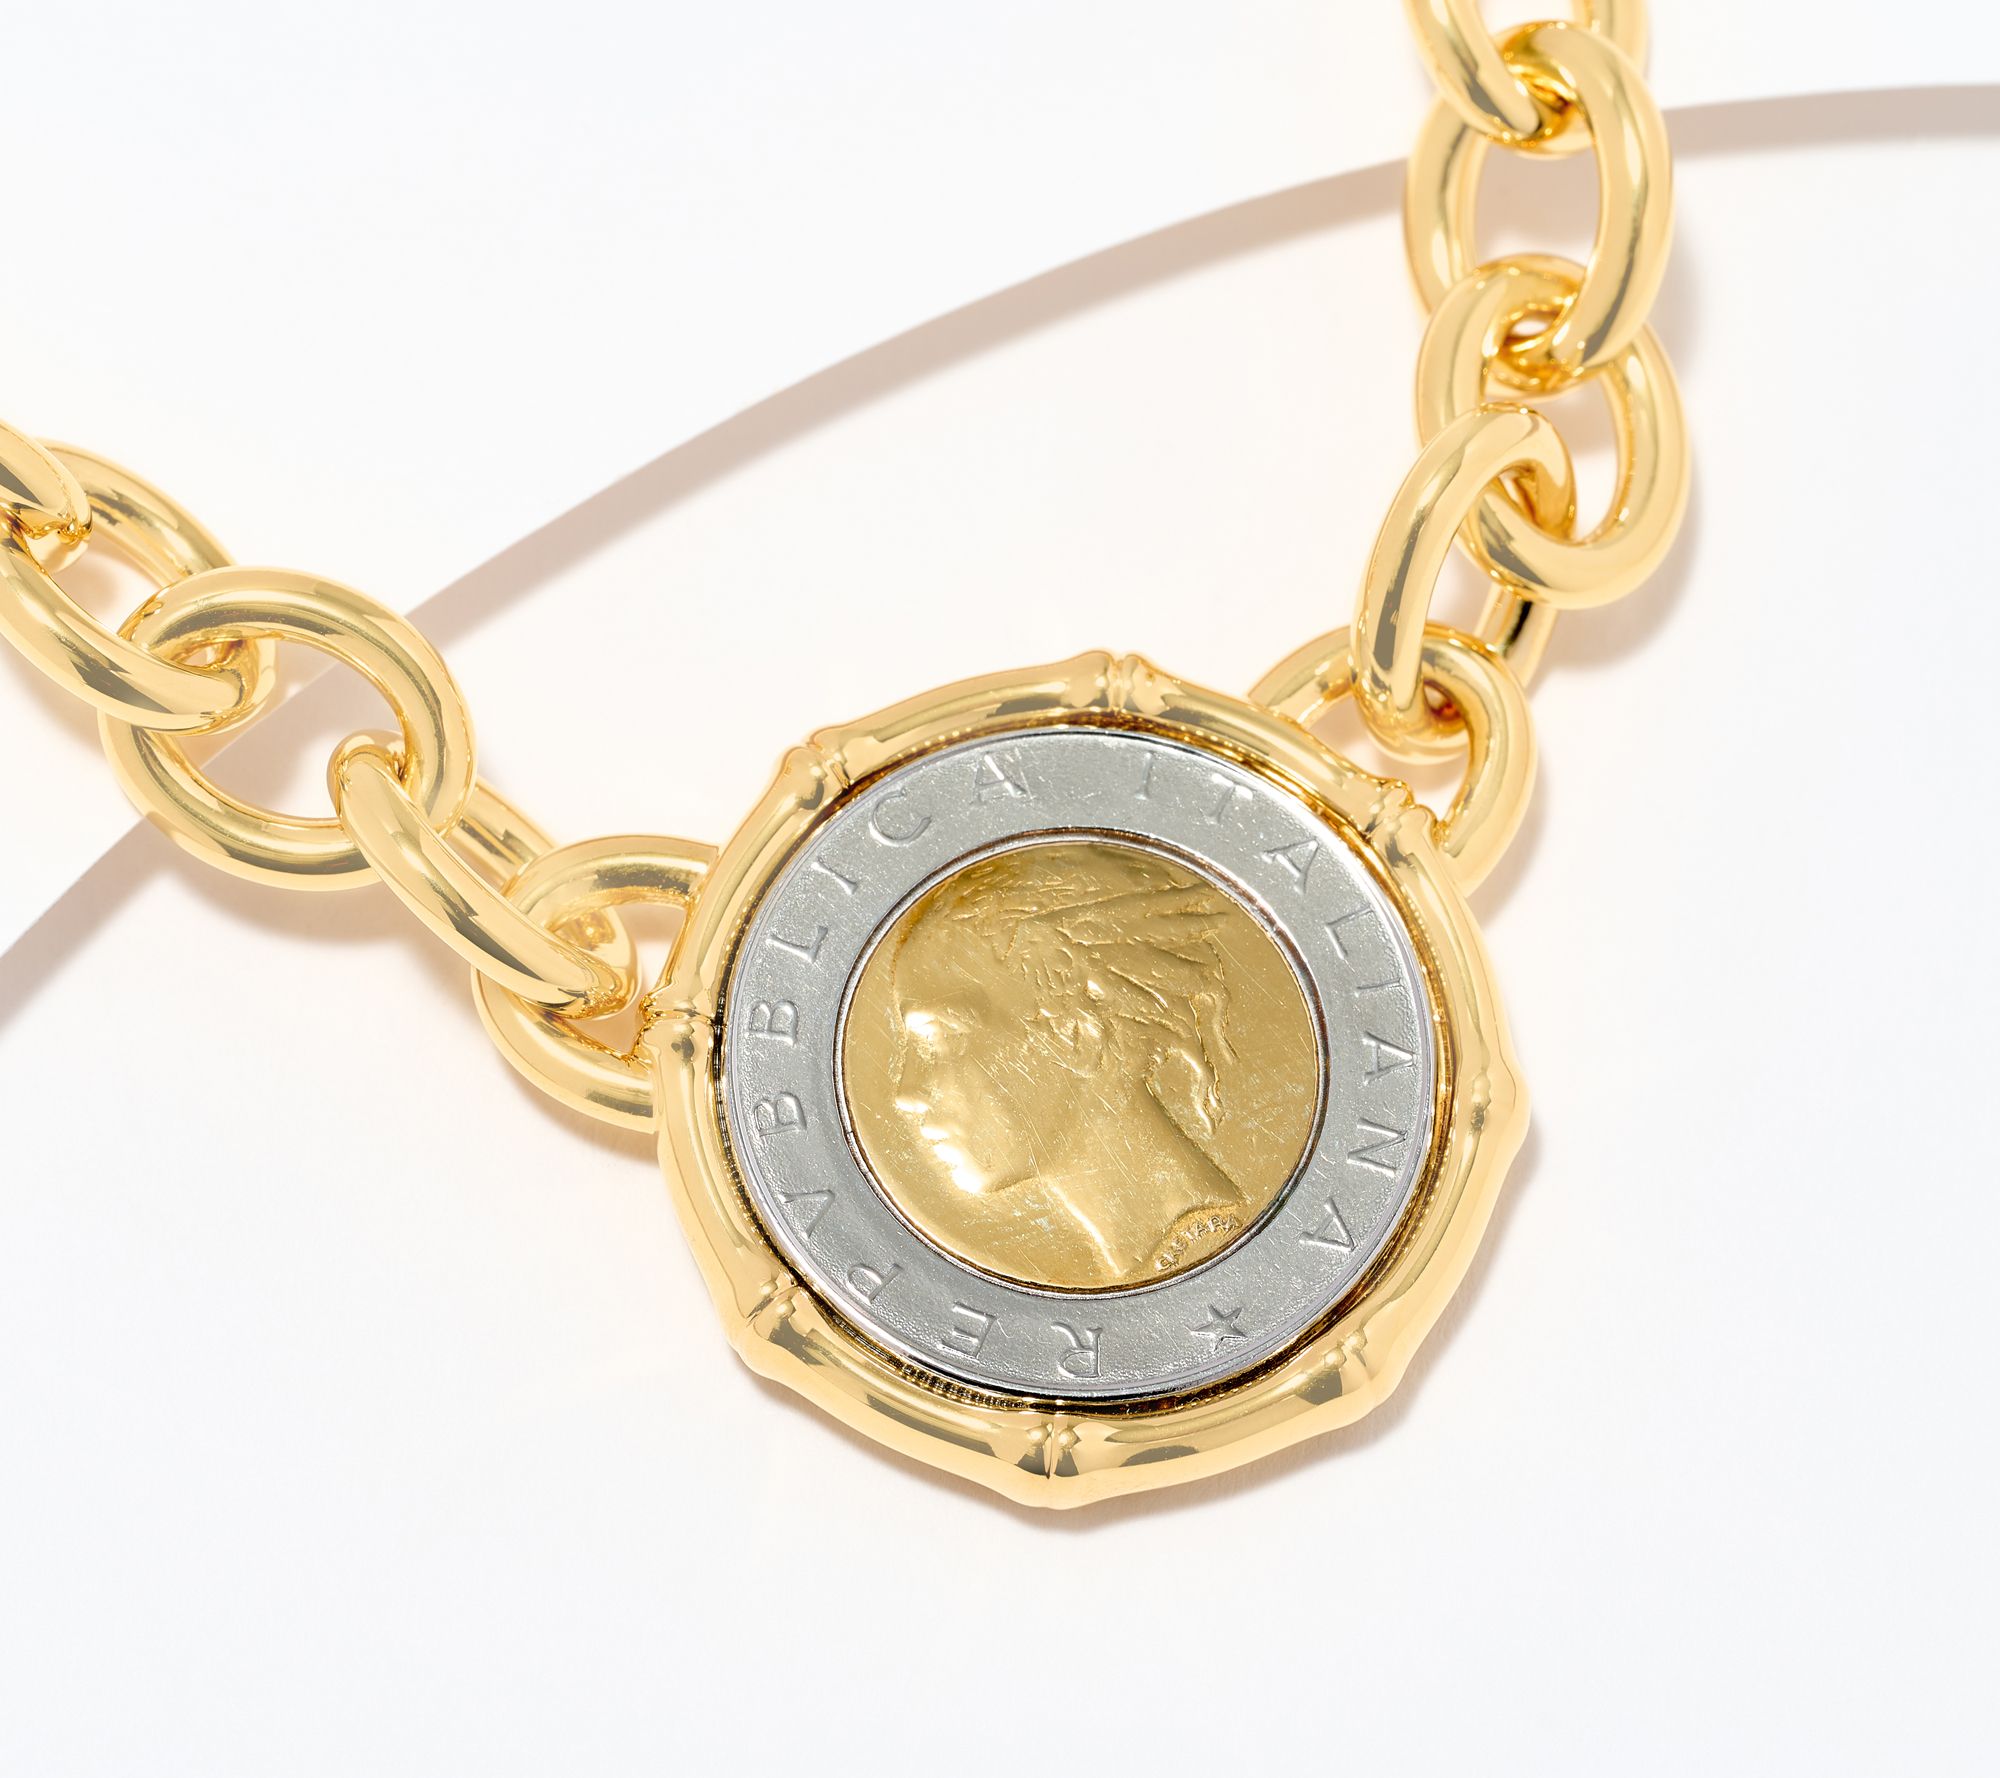 Polished Antique Coin Necklace 14K Yellow Gold